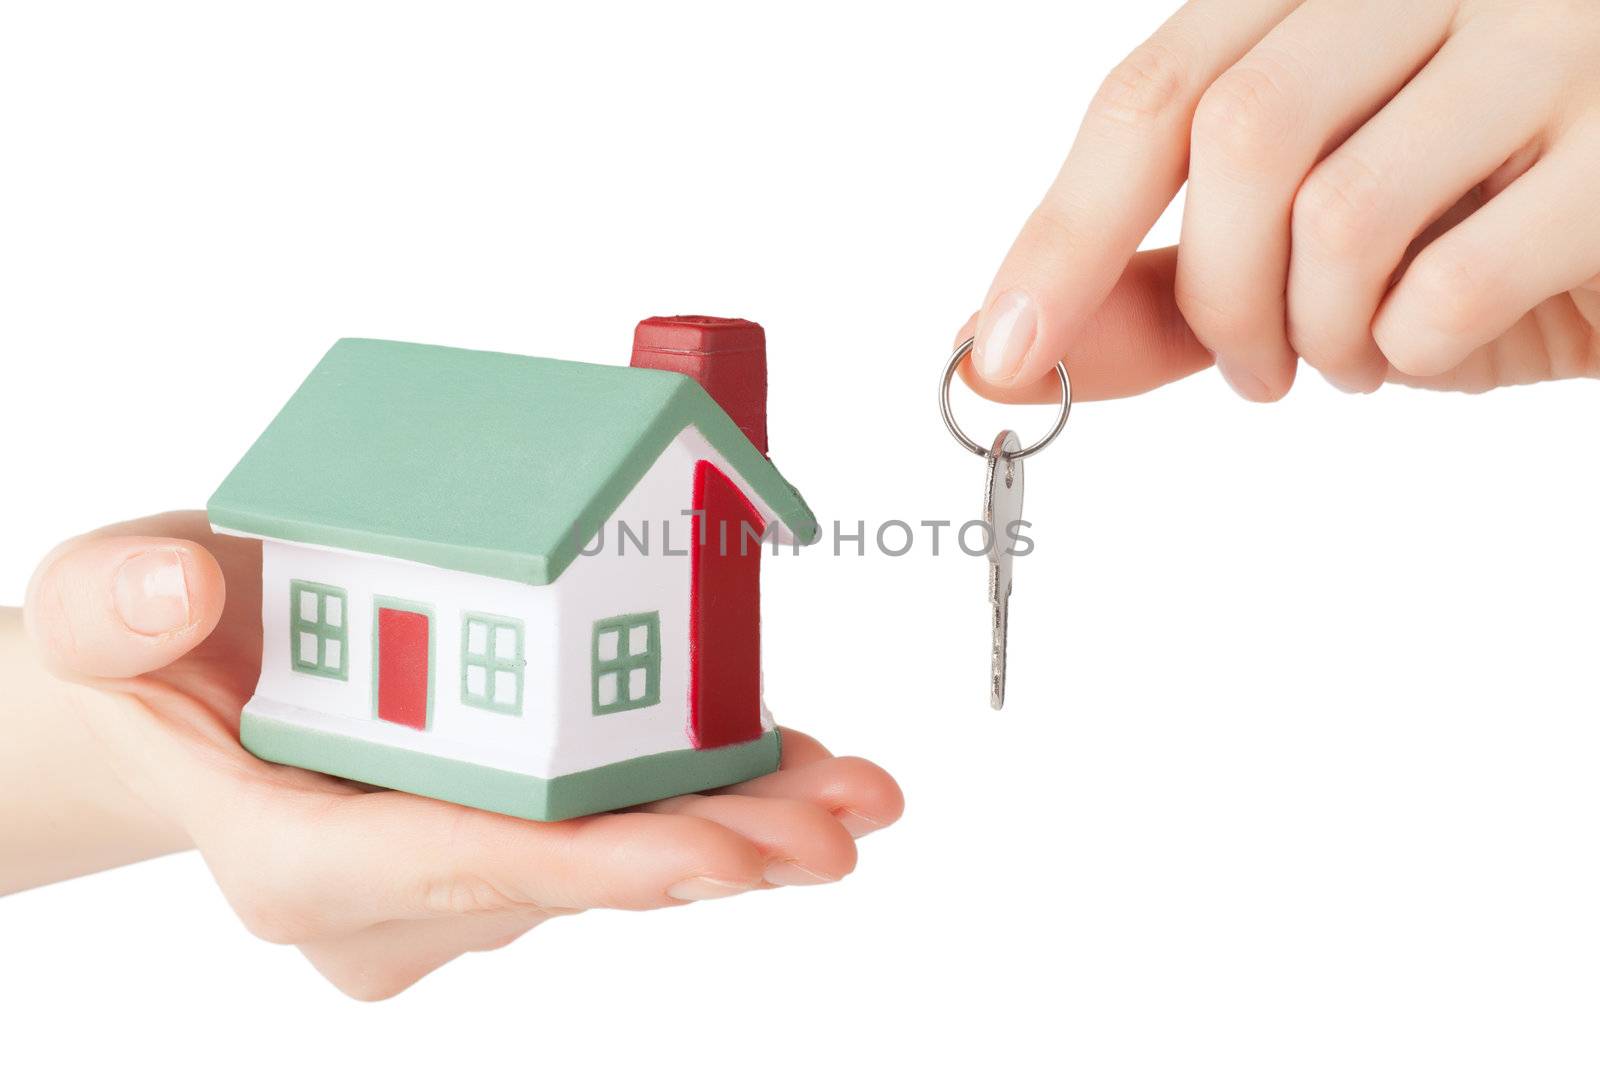 Little house toy and key in hands isolated over white background